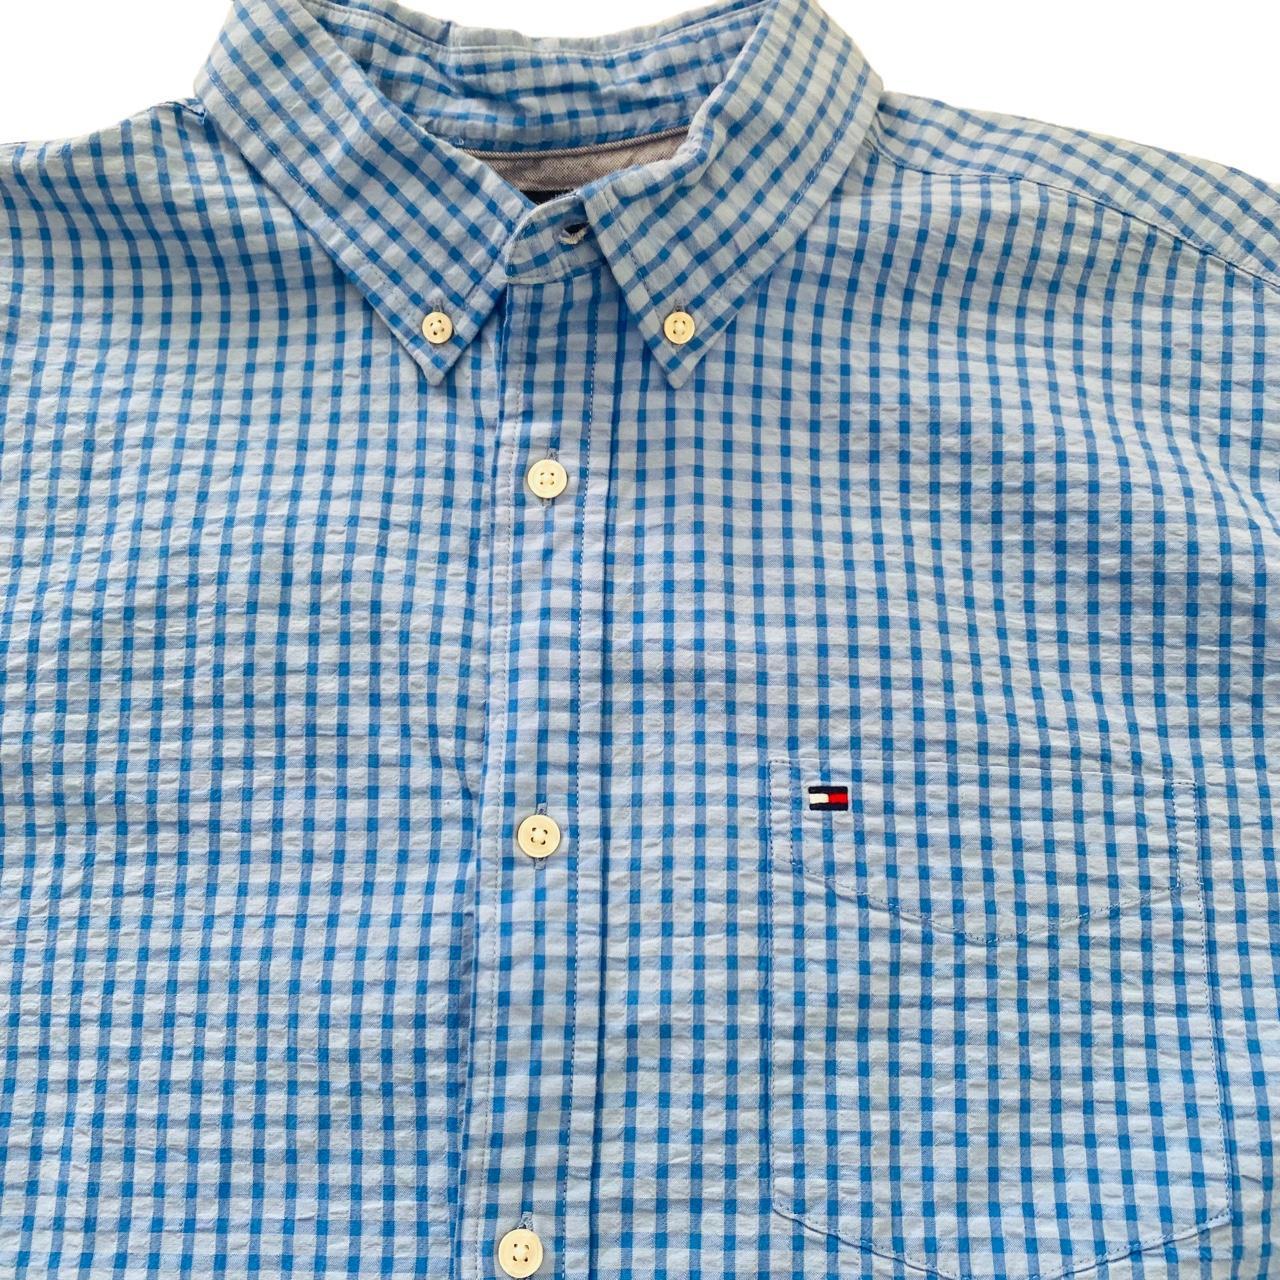 Product Image 4 - Tommy Hilfiger Searsucker Short Sleeve